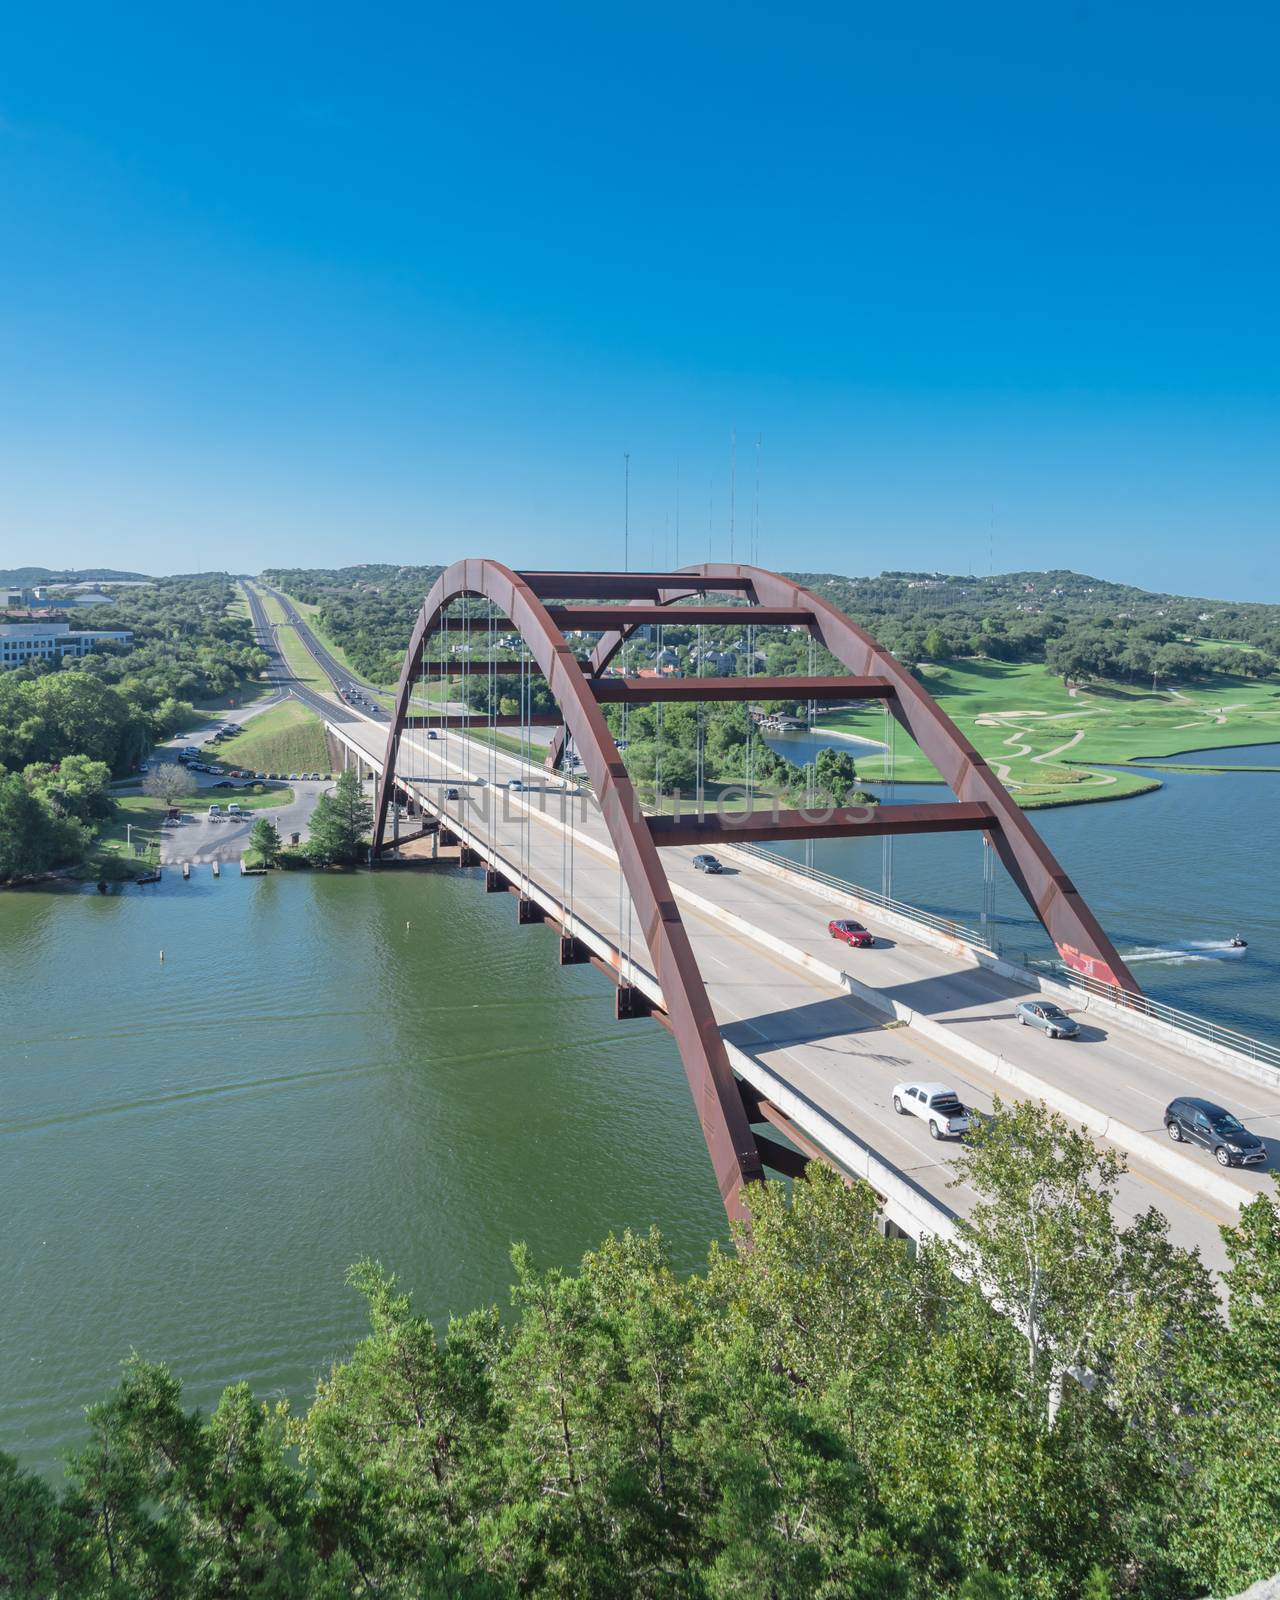 Pennybacker Bridge over Colorado river and Hill Country landscape in Austin by trongnguyen